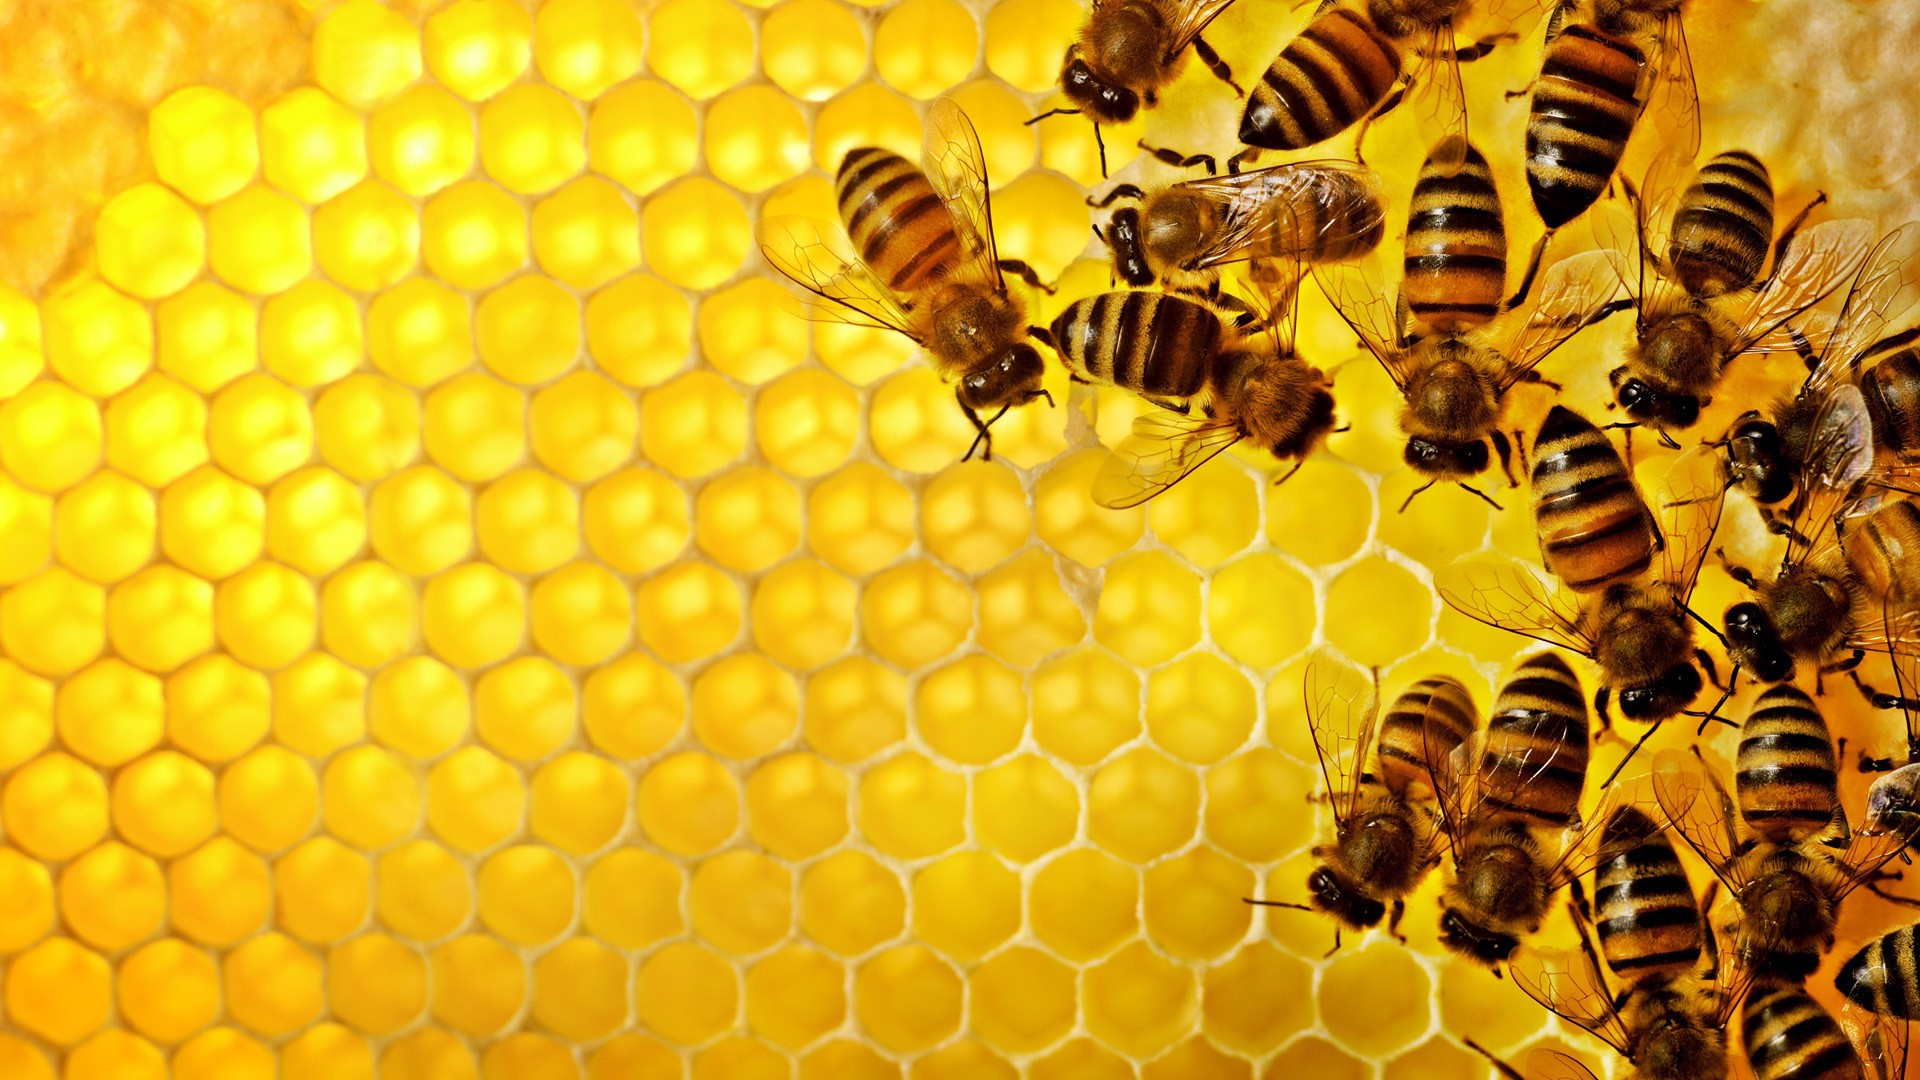 Pattern Texture Geometry Hexagon Nature Insect Bees Honey Yellow Hive 1920x1080